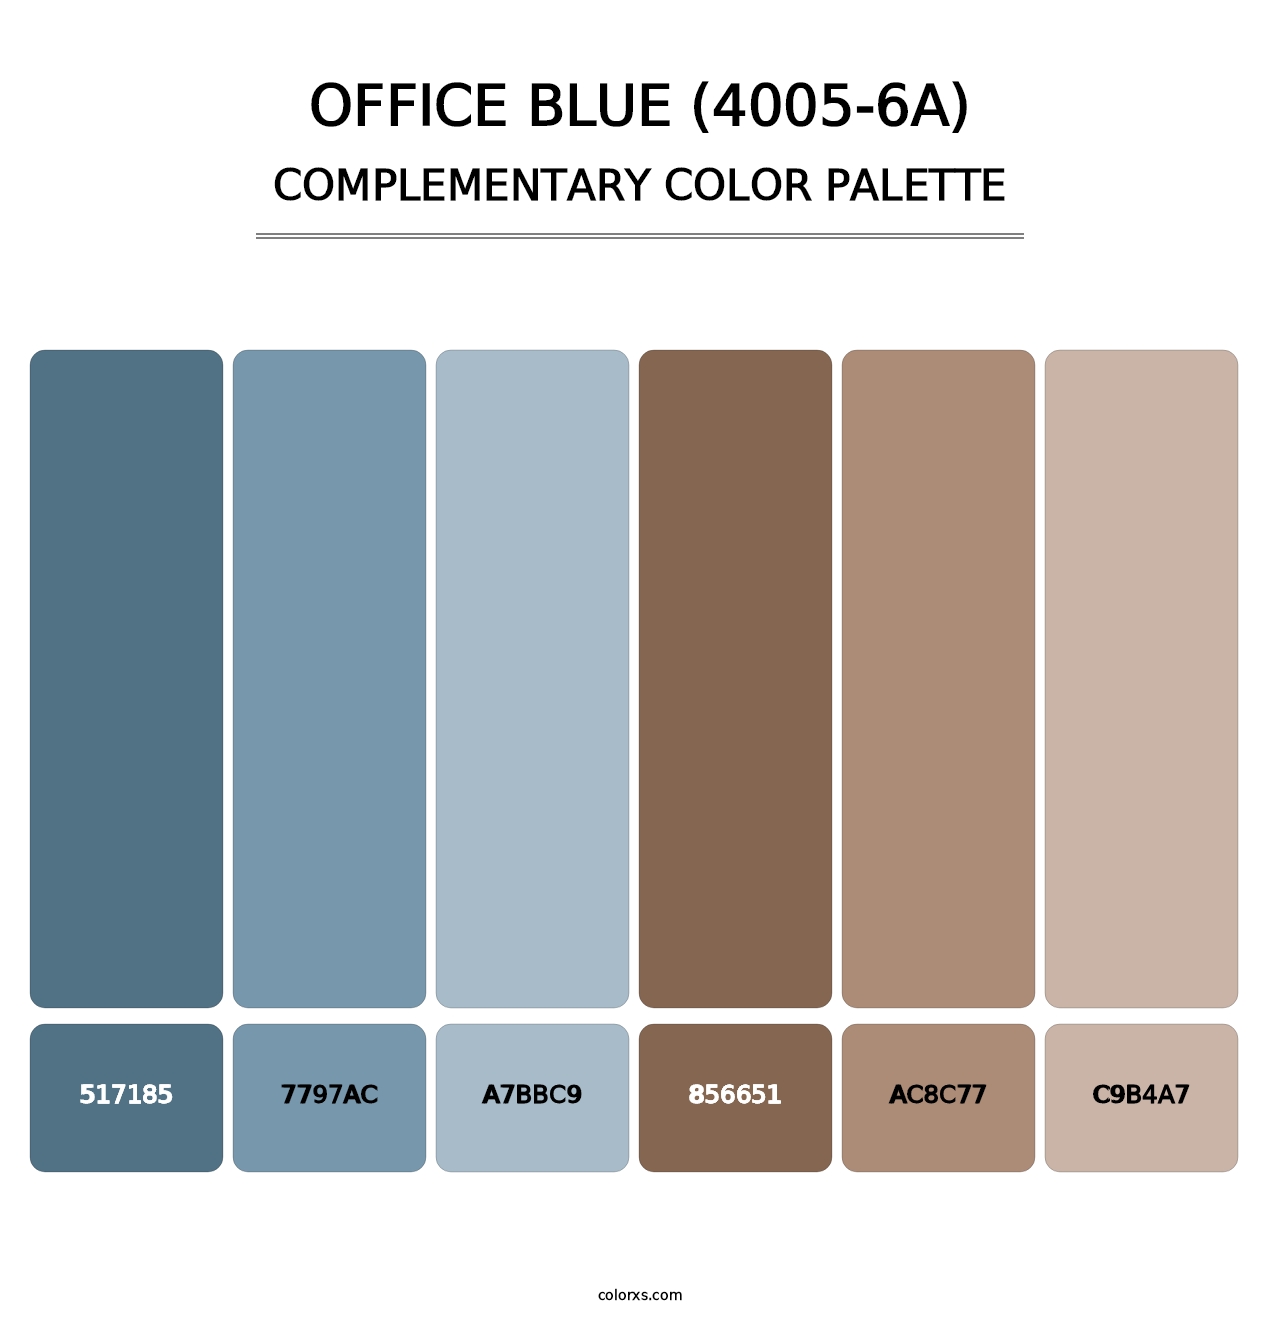 Office Blue (4005-6A) - Complementary Color Palette